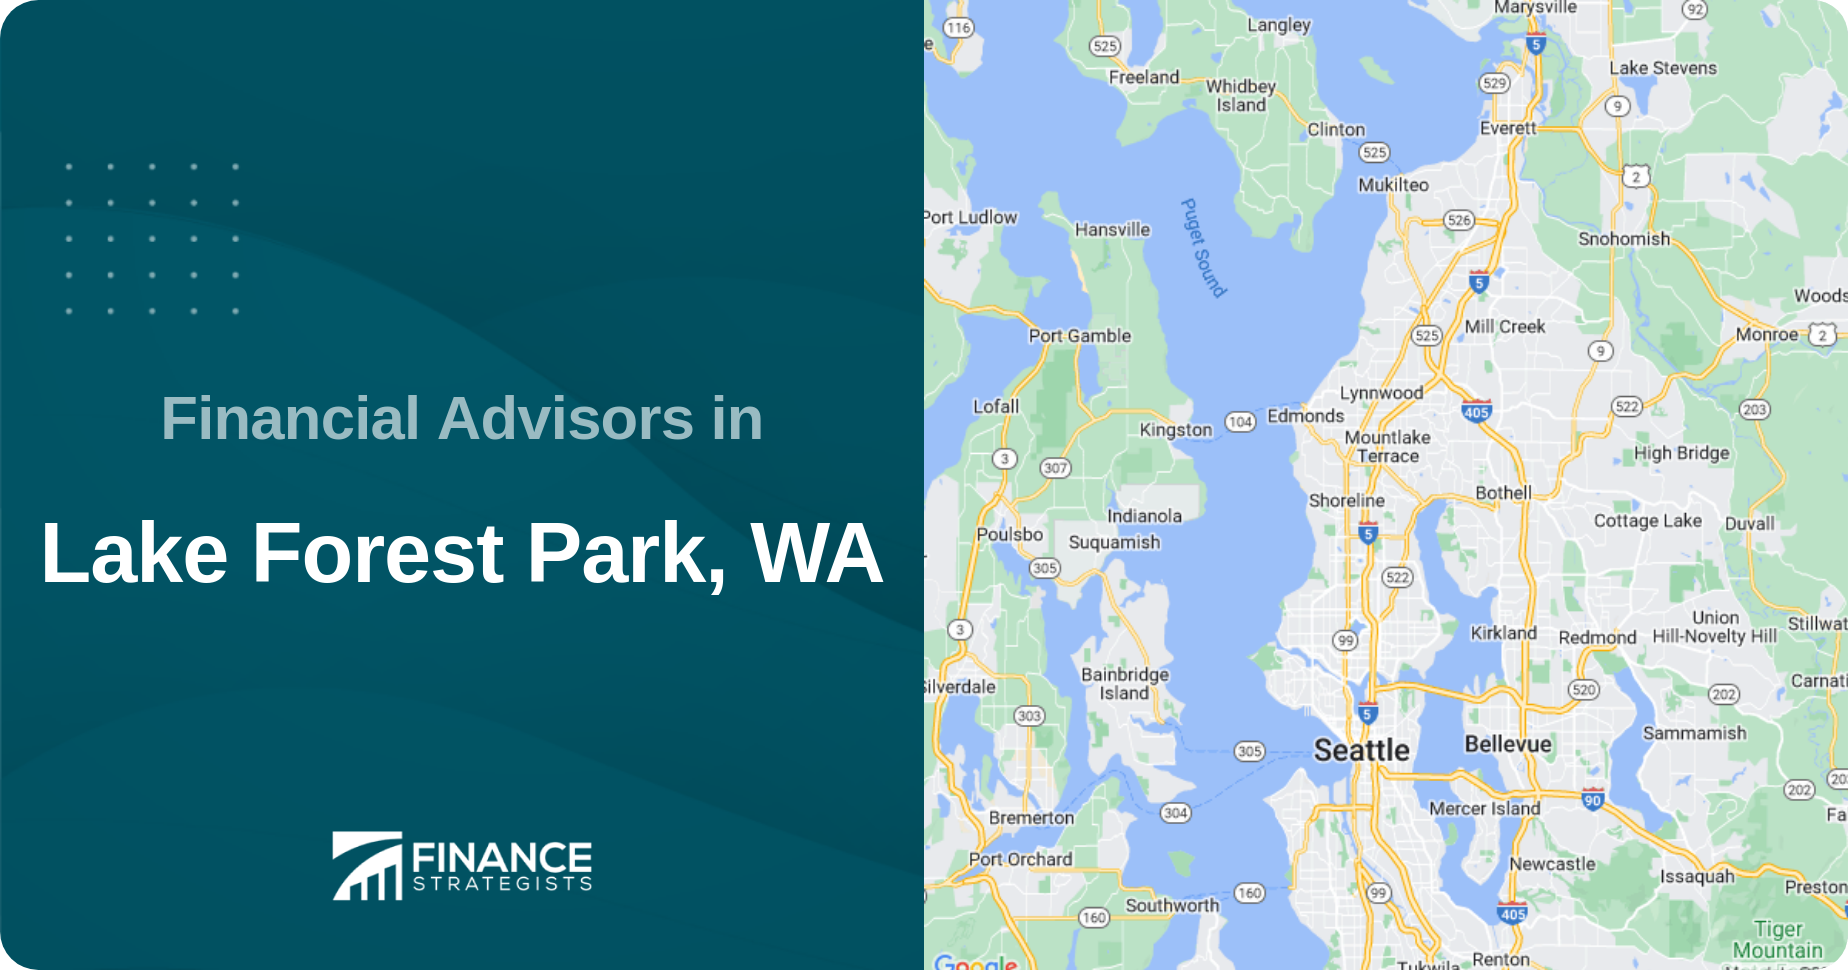 Financial Advisors in Lake Forest Park, WA